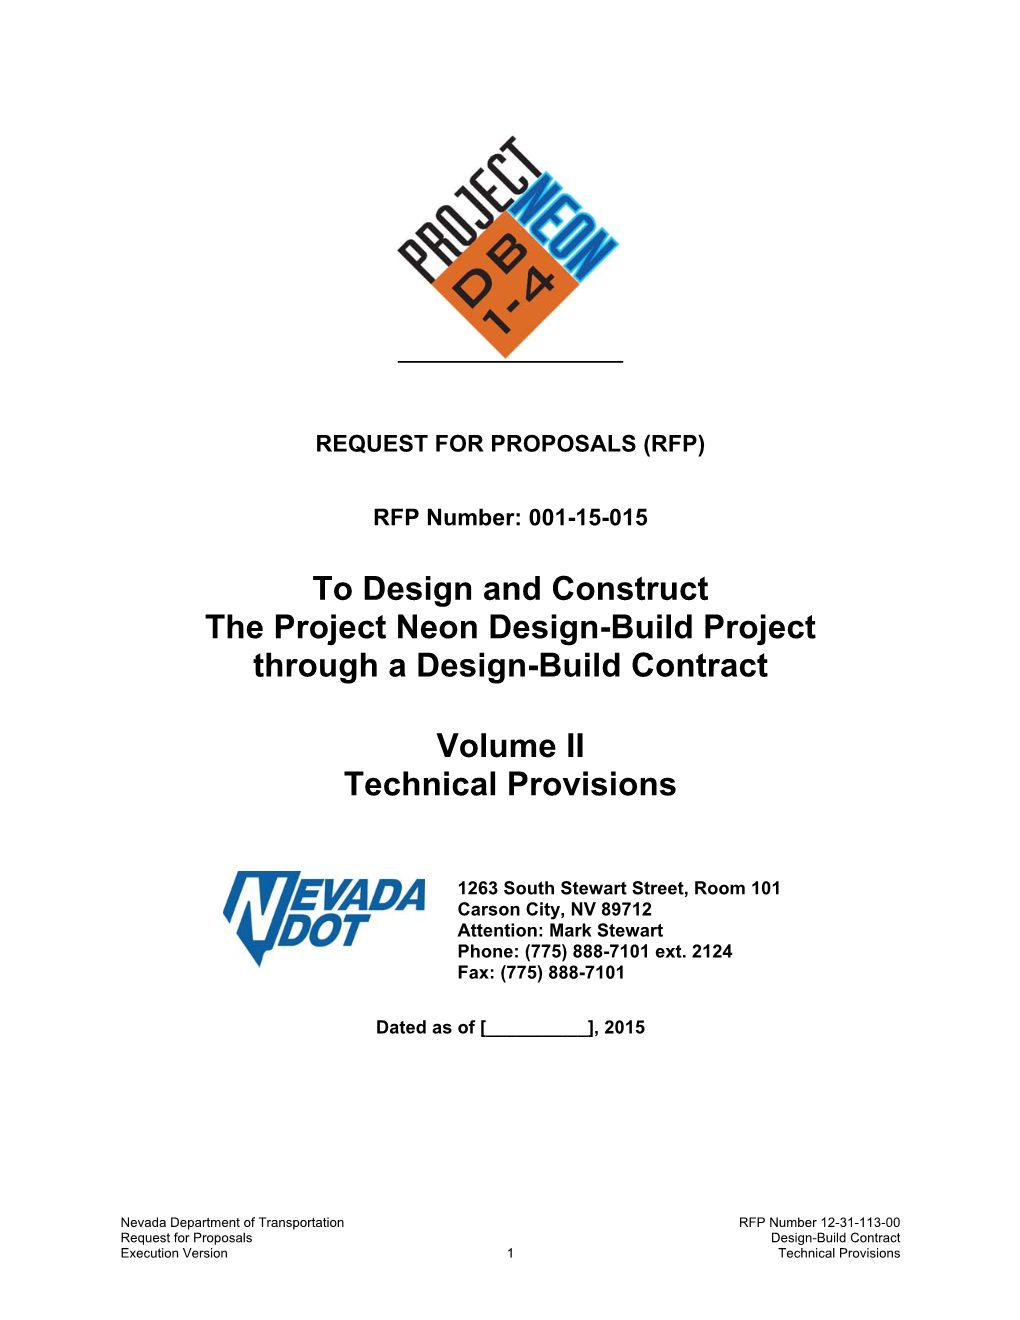 To Design and Construct the Project Neon Design-Build Project Through a Design-Build Contract